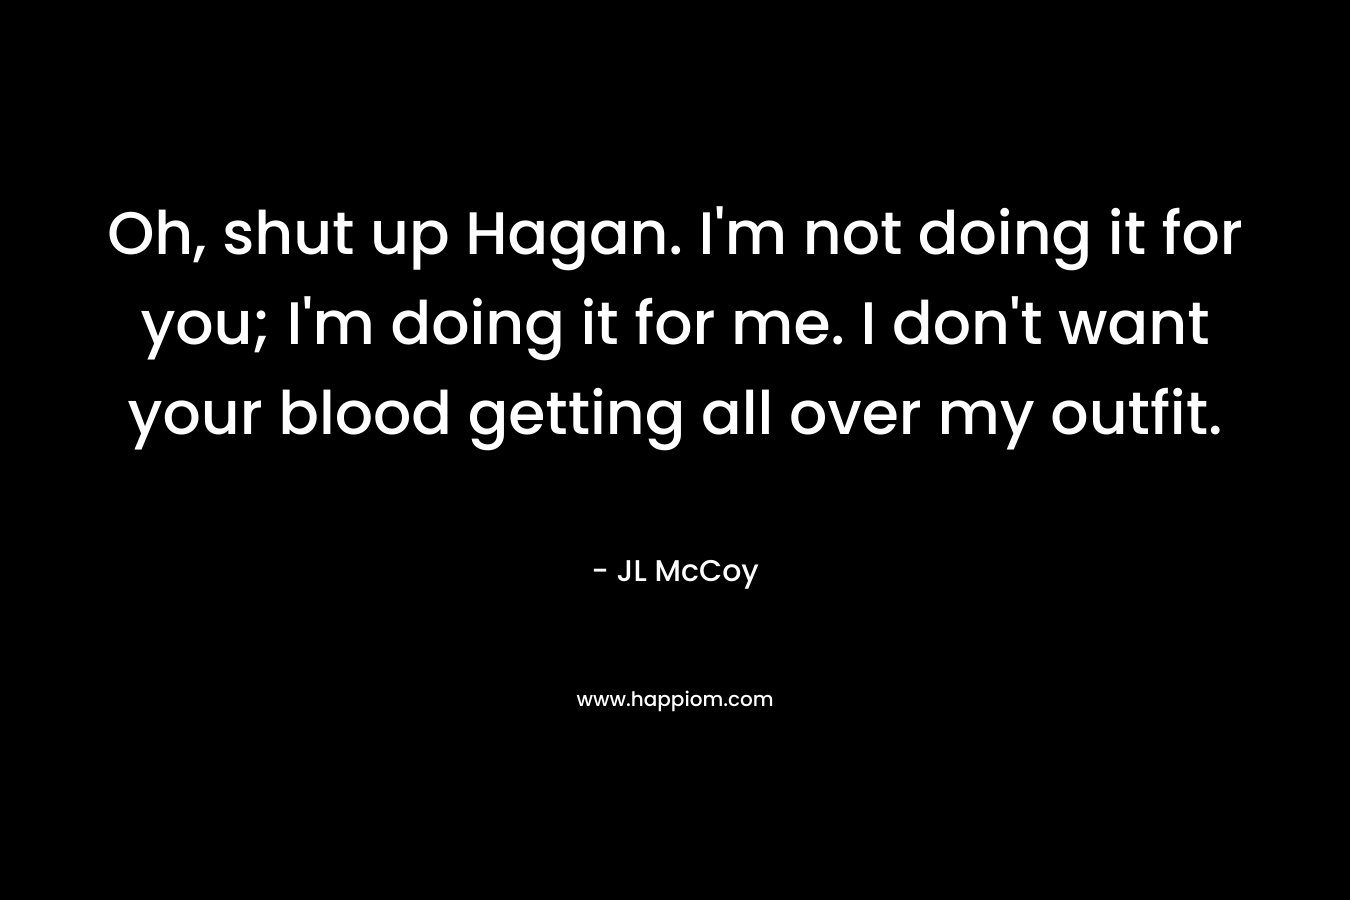 Oh, shut up Hagan. I’m not doing it for you; I’m doing it for me. I don’t want your blood getting all over my outfit. – JL McCoy